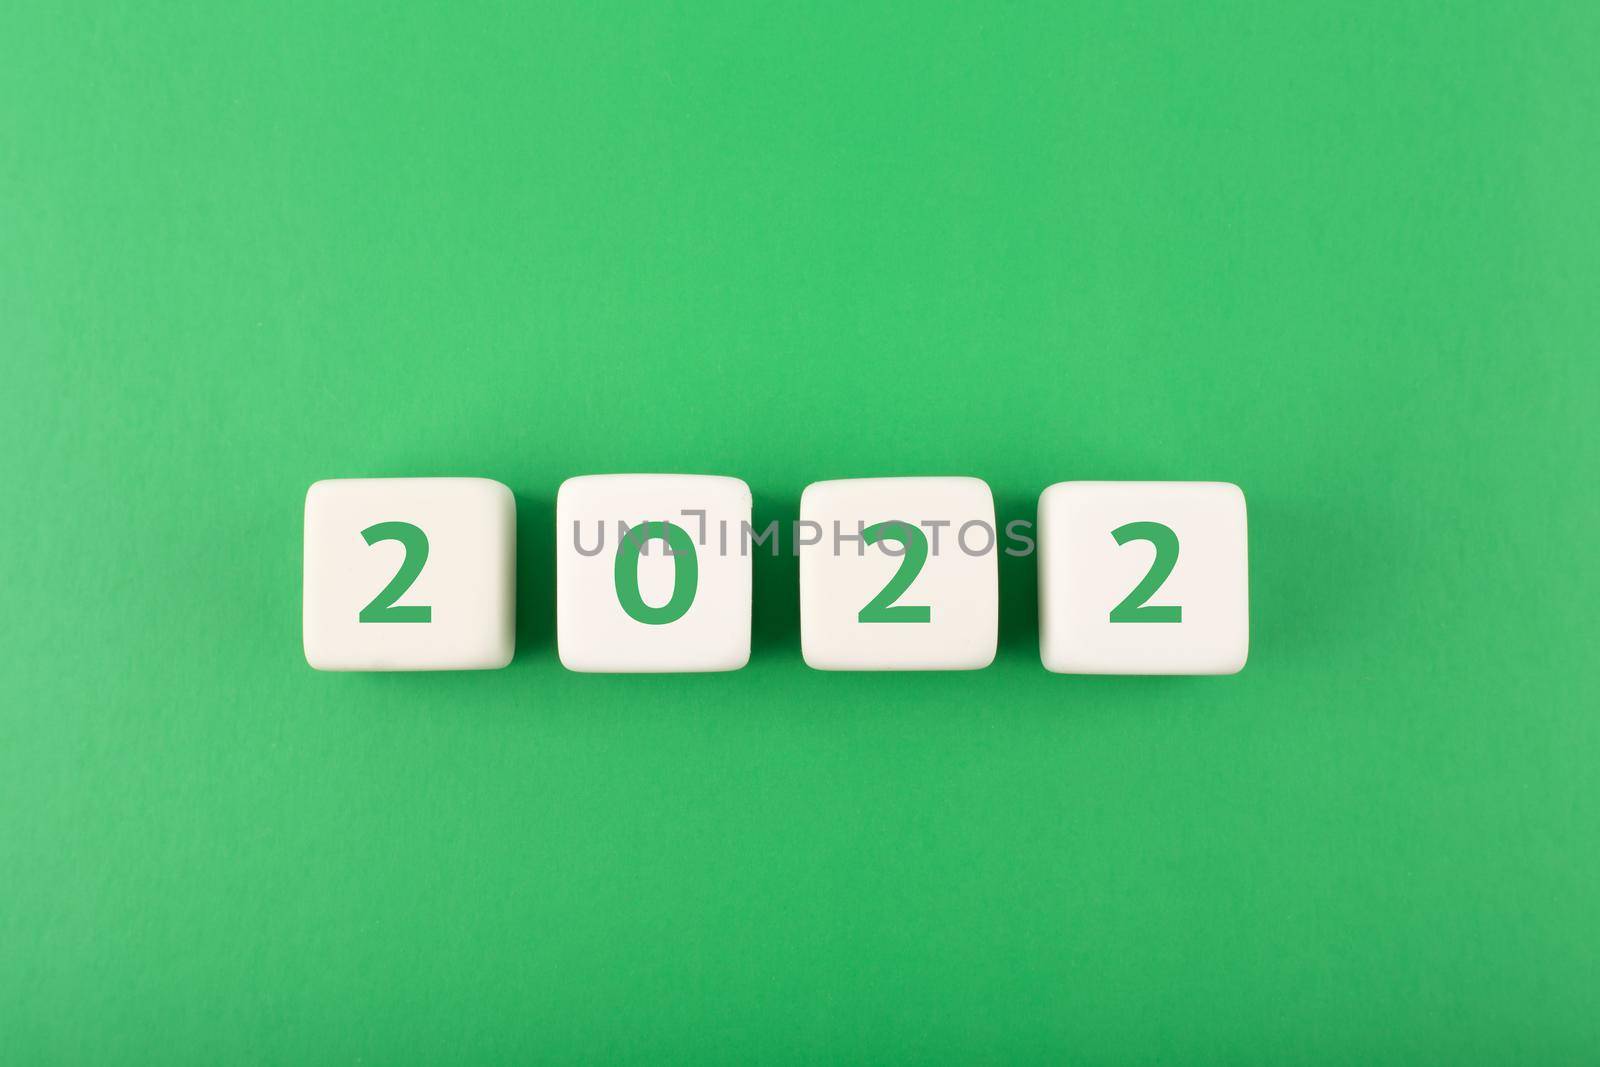 2022 numbers on white cubes against green background. Minimal elegant business style concept of New Year 